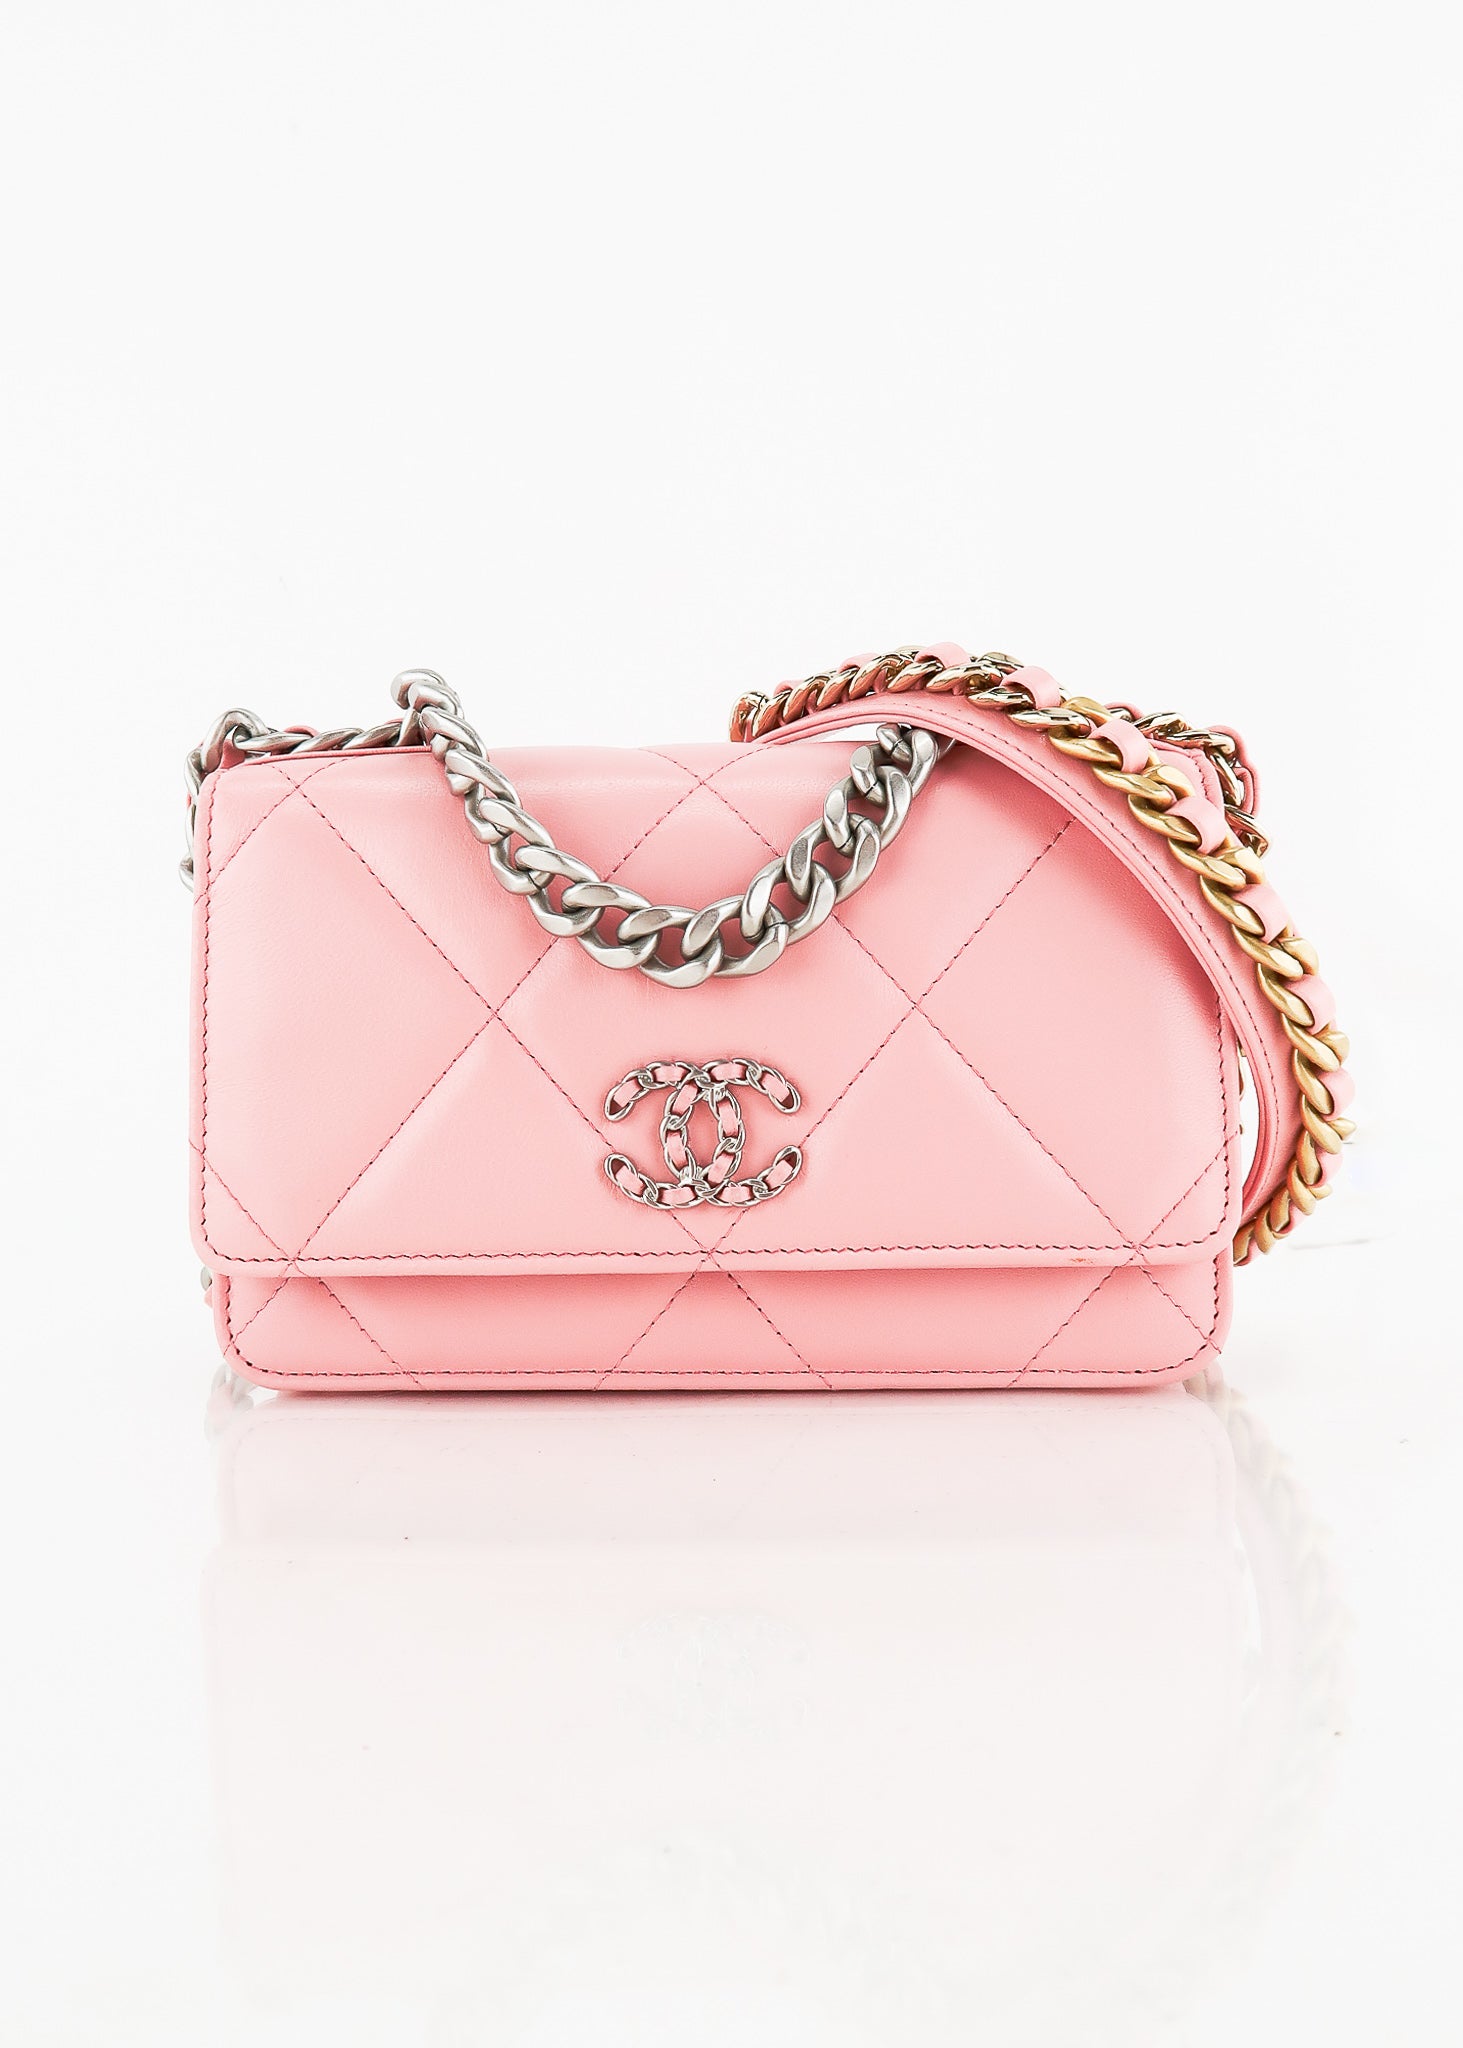 CHANEL 19 21A Pink Wallet on the Chain Crossbody Bag